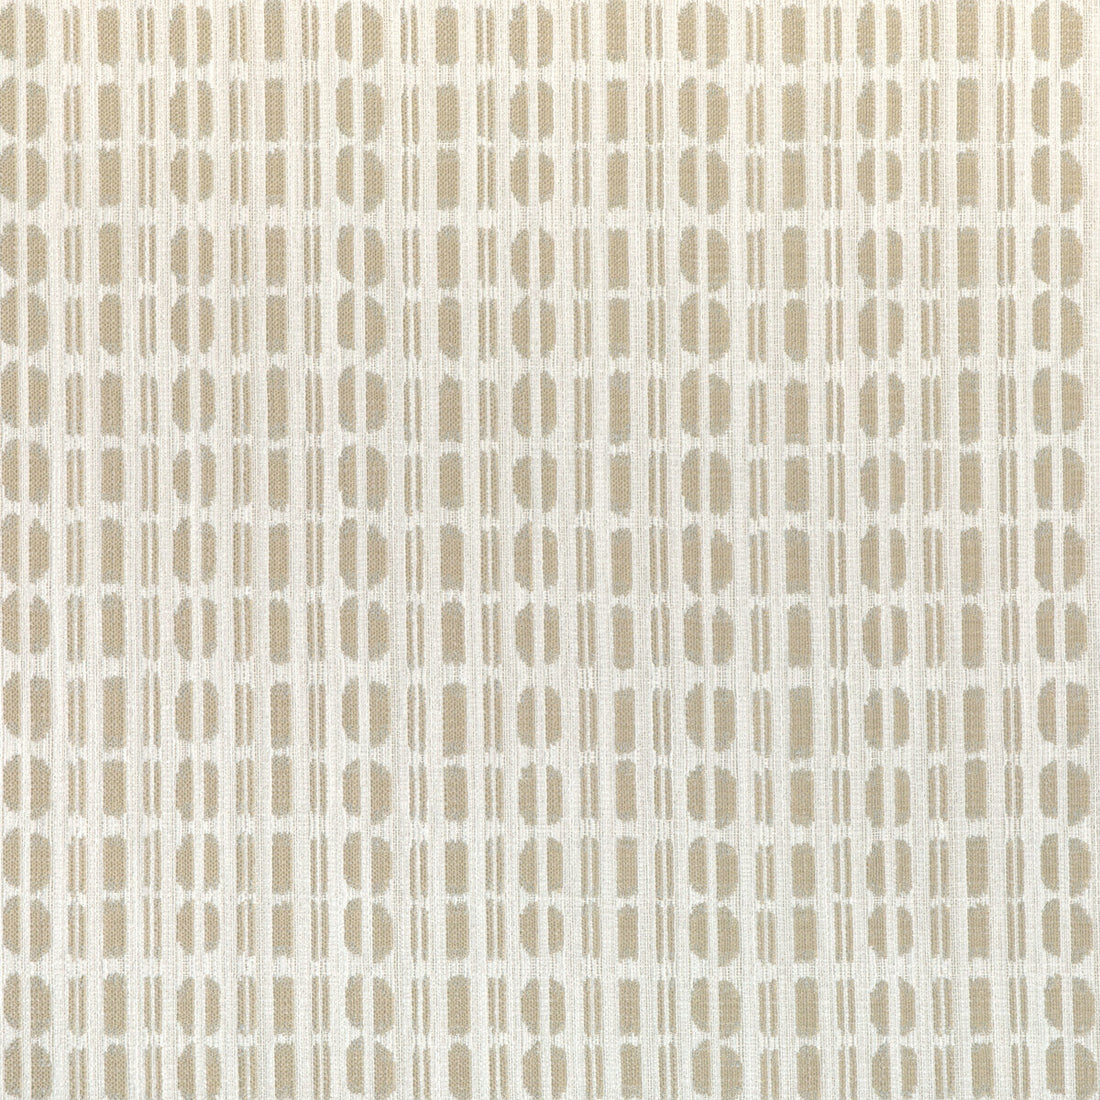 Lorax fabric in parchment color - pattern 37061.16.0 - by Kravet Design in the Thom Filicia Latitude collection